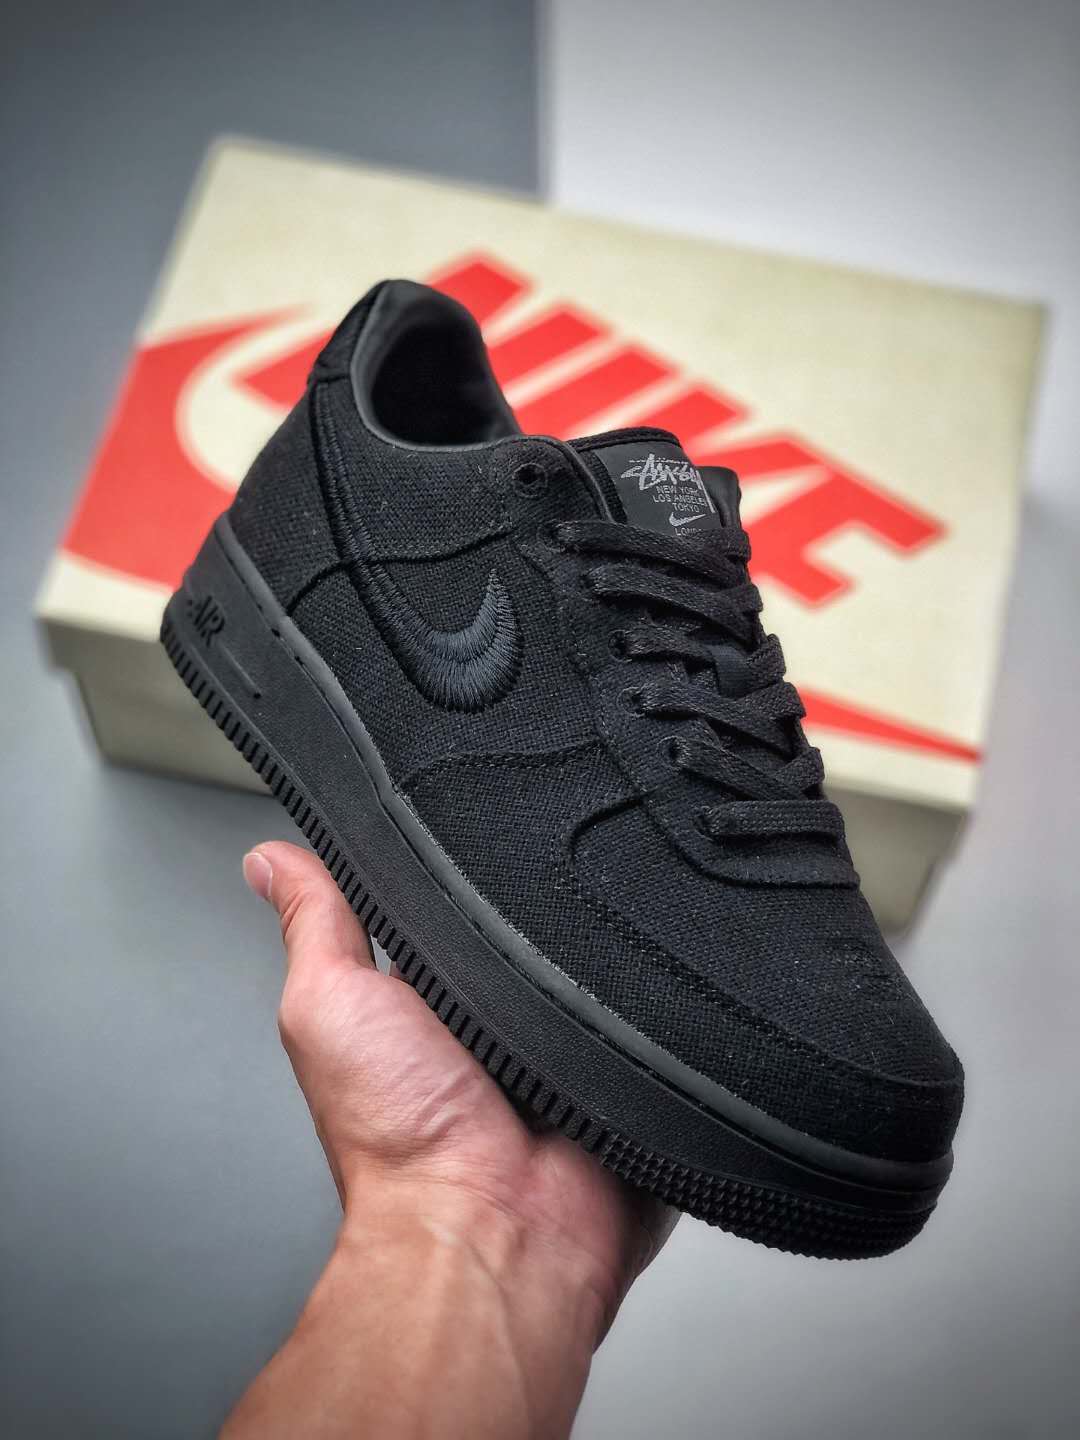 Nike Stussy x Air Force 1 Low 'Triple Black' CZ9084-001 Available Now